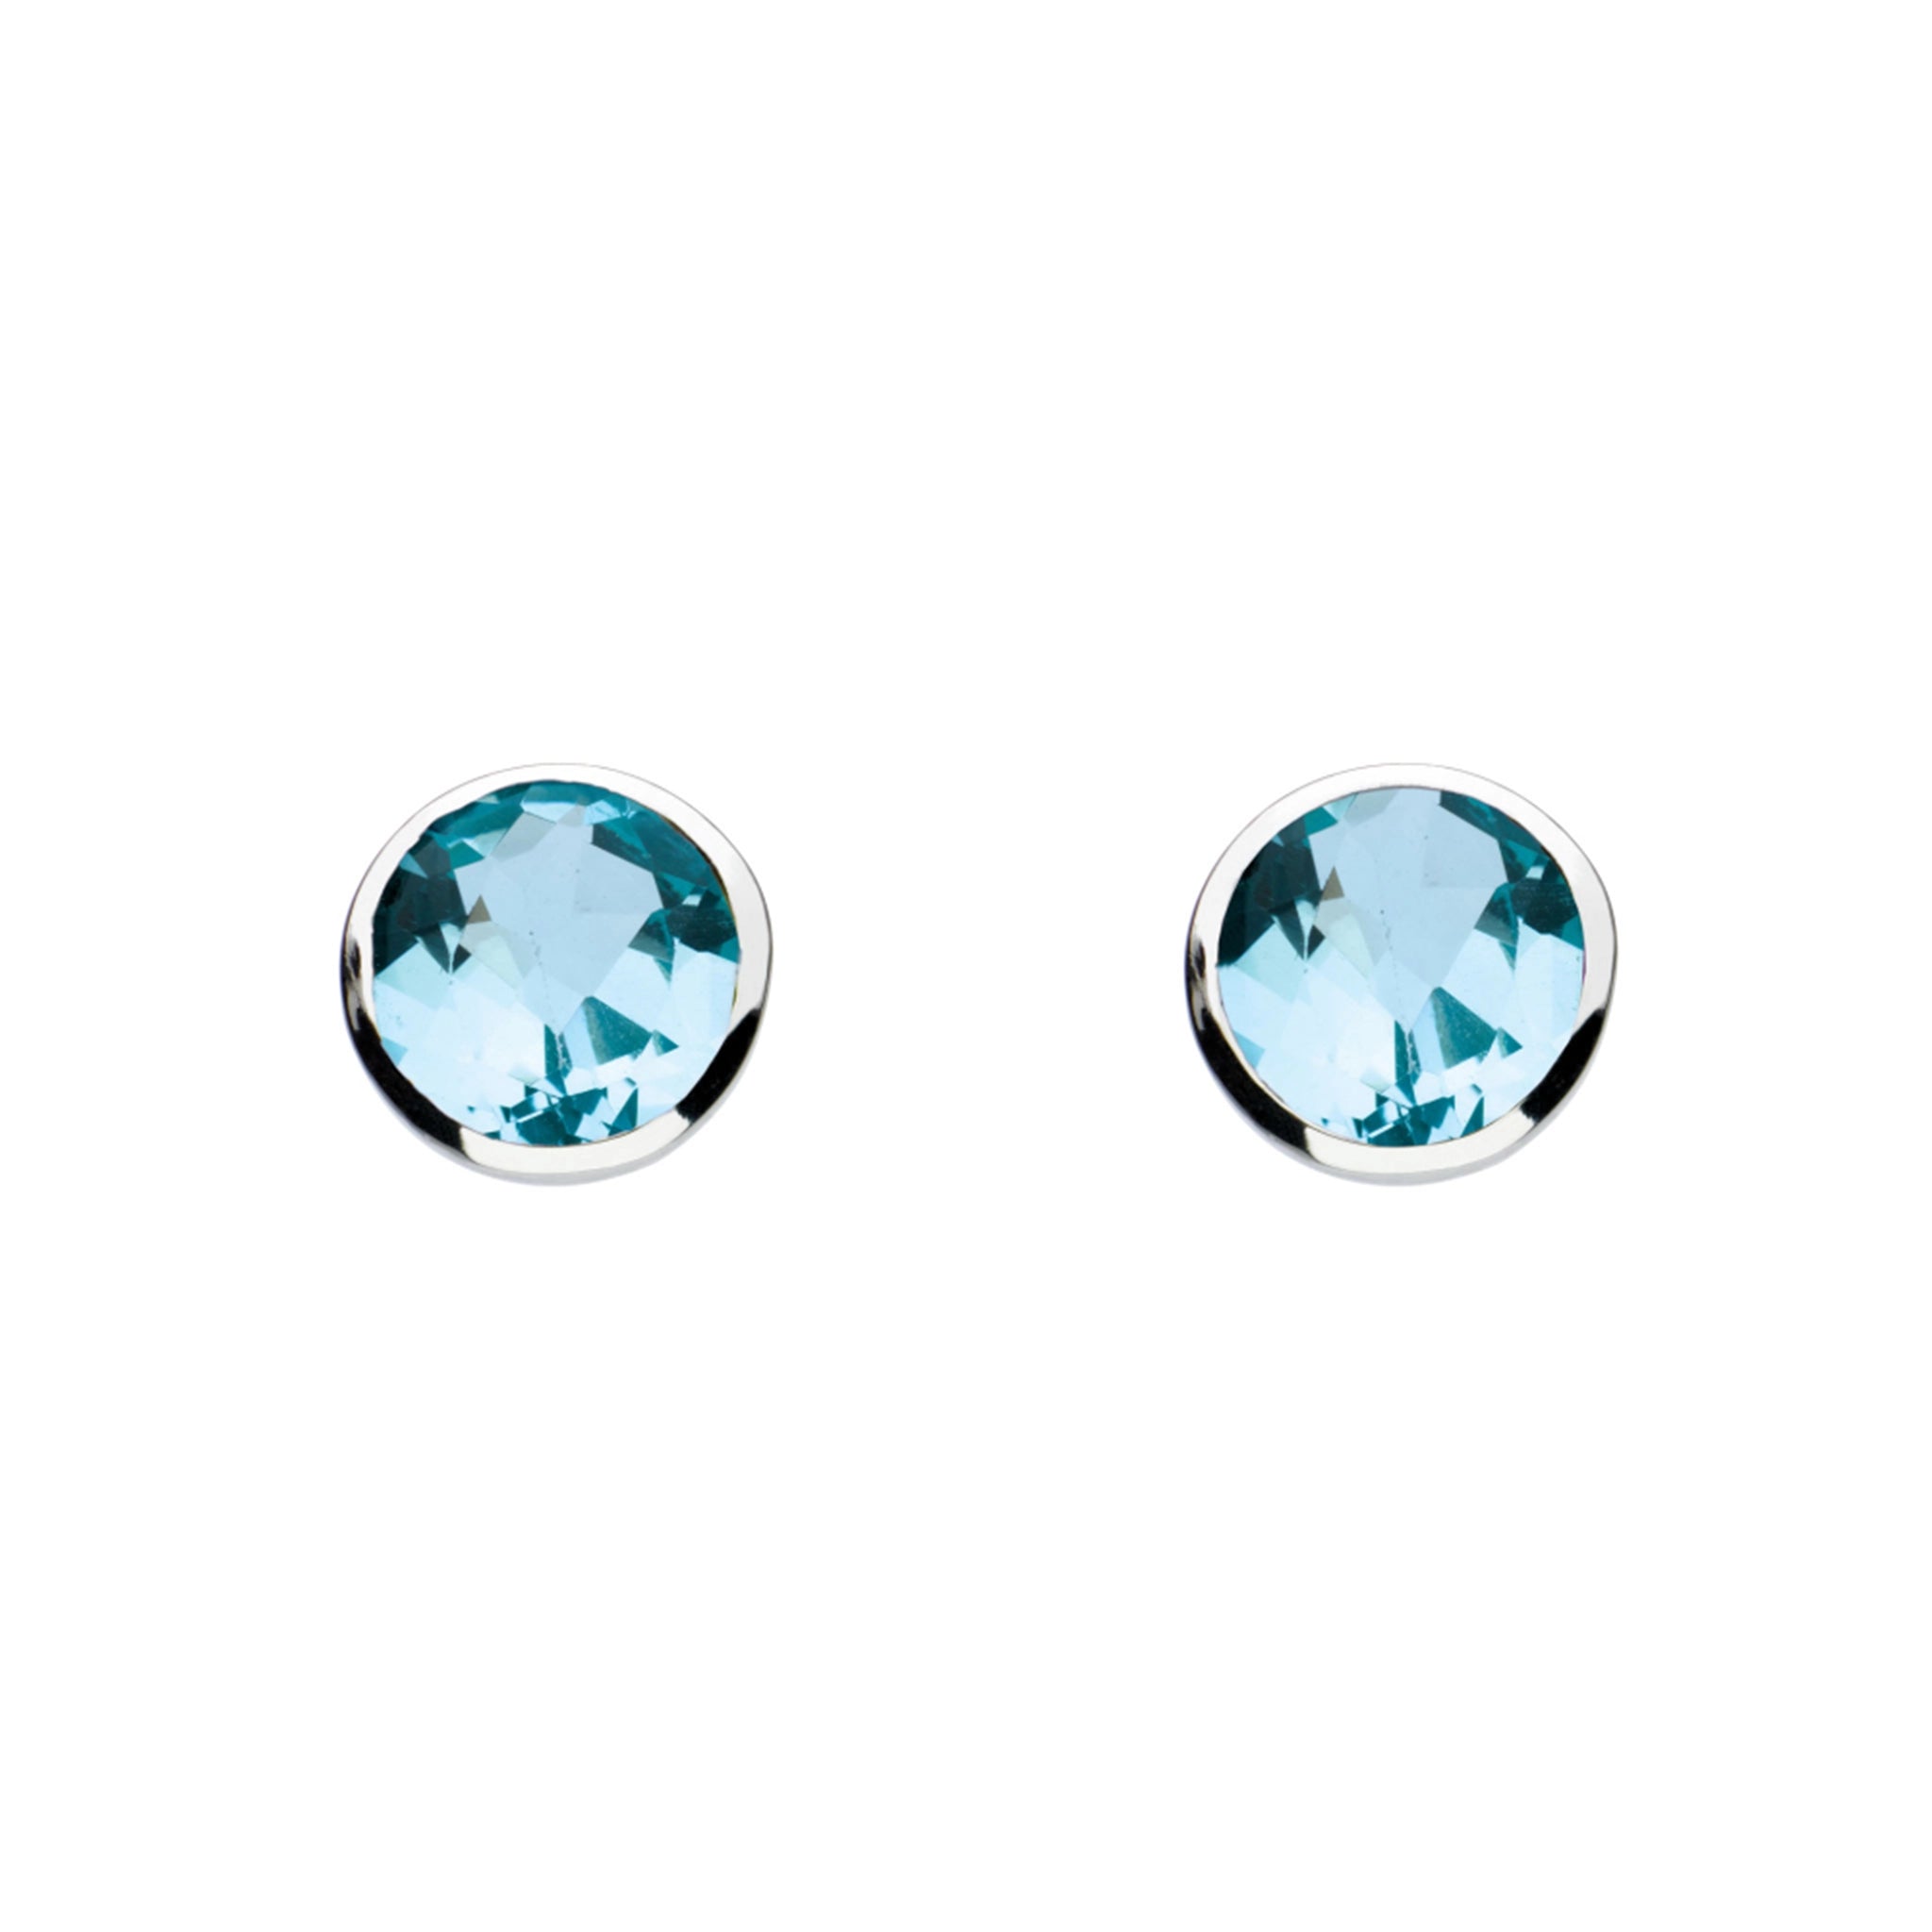 A pair of silver round stud earrings with faceted blue topaz stones